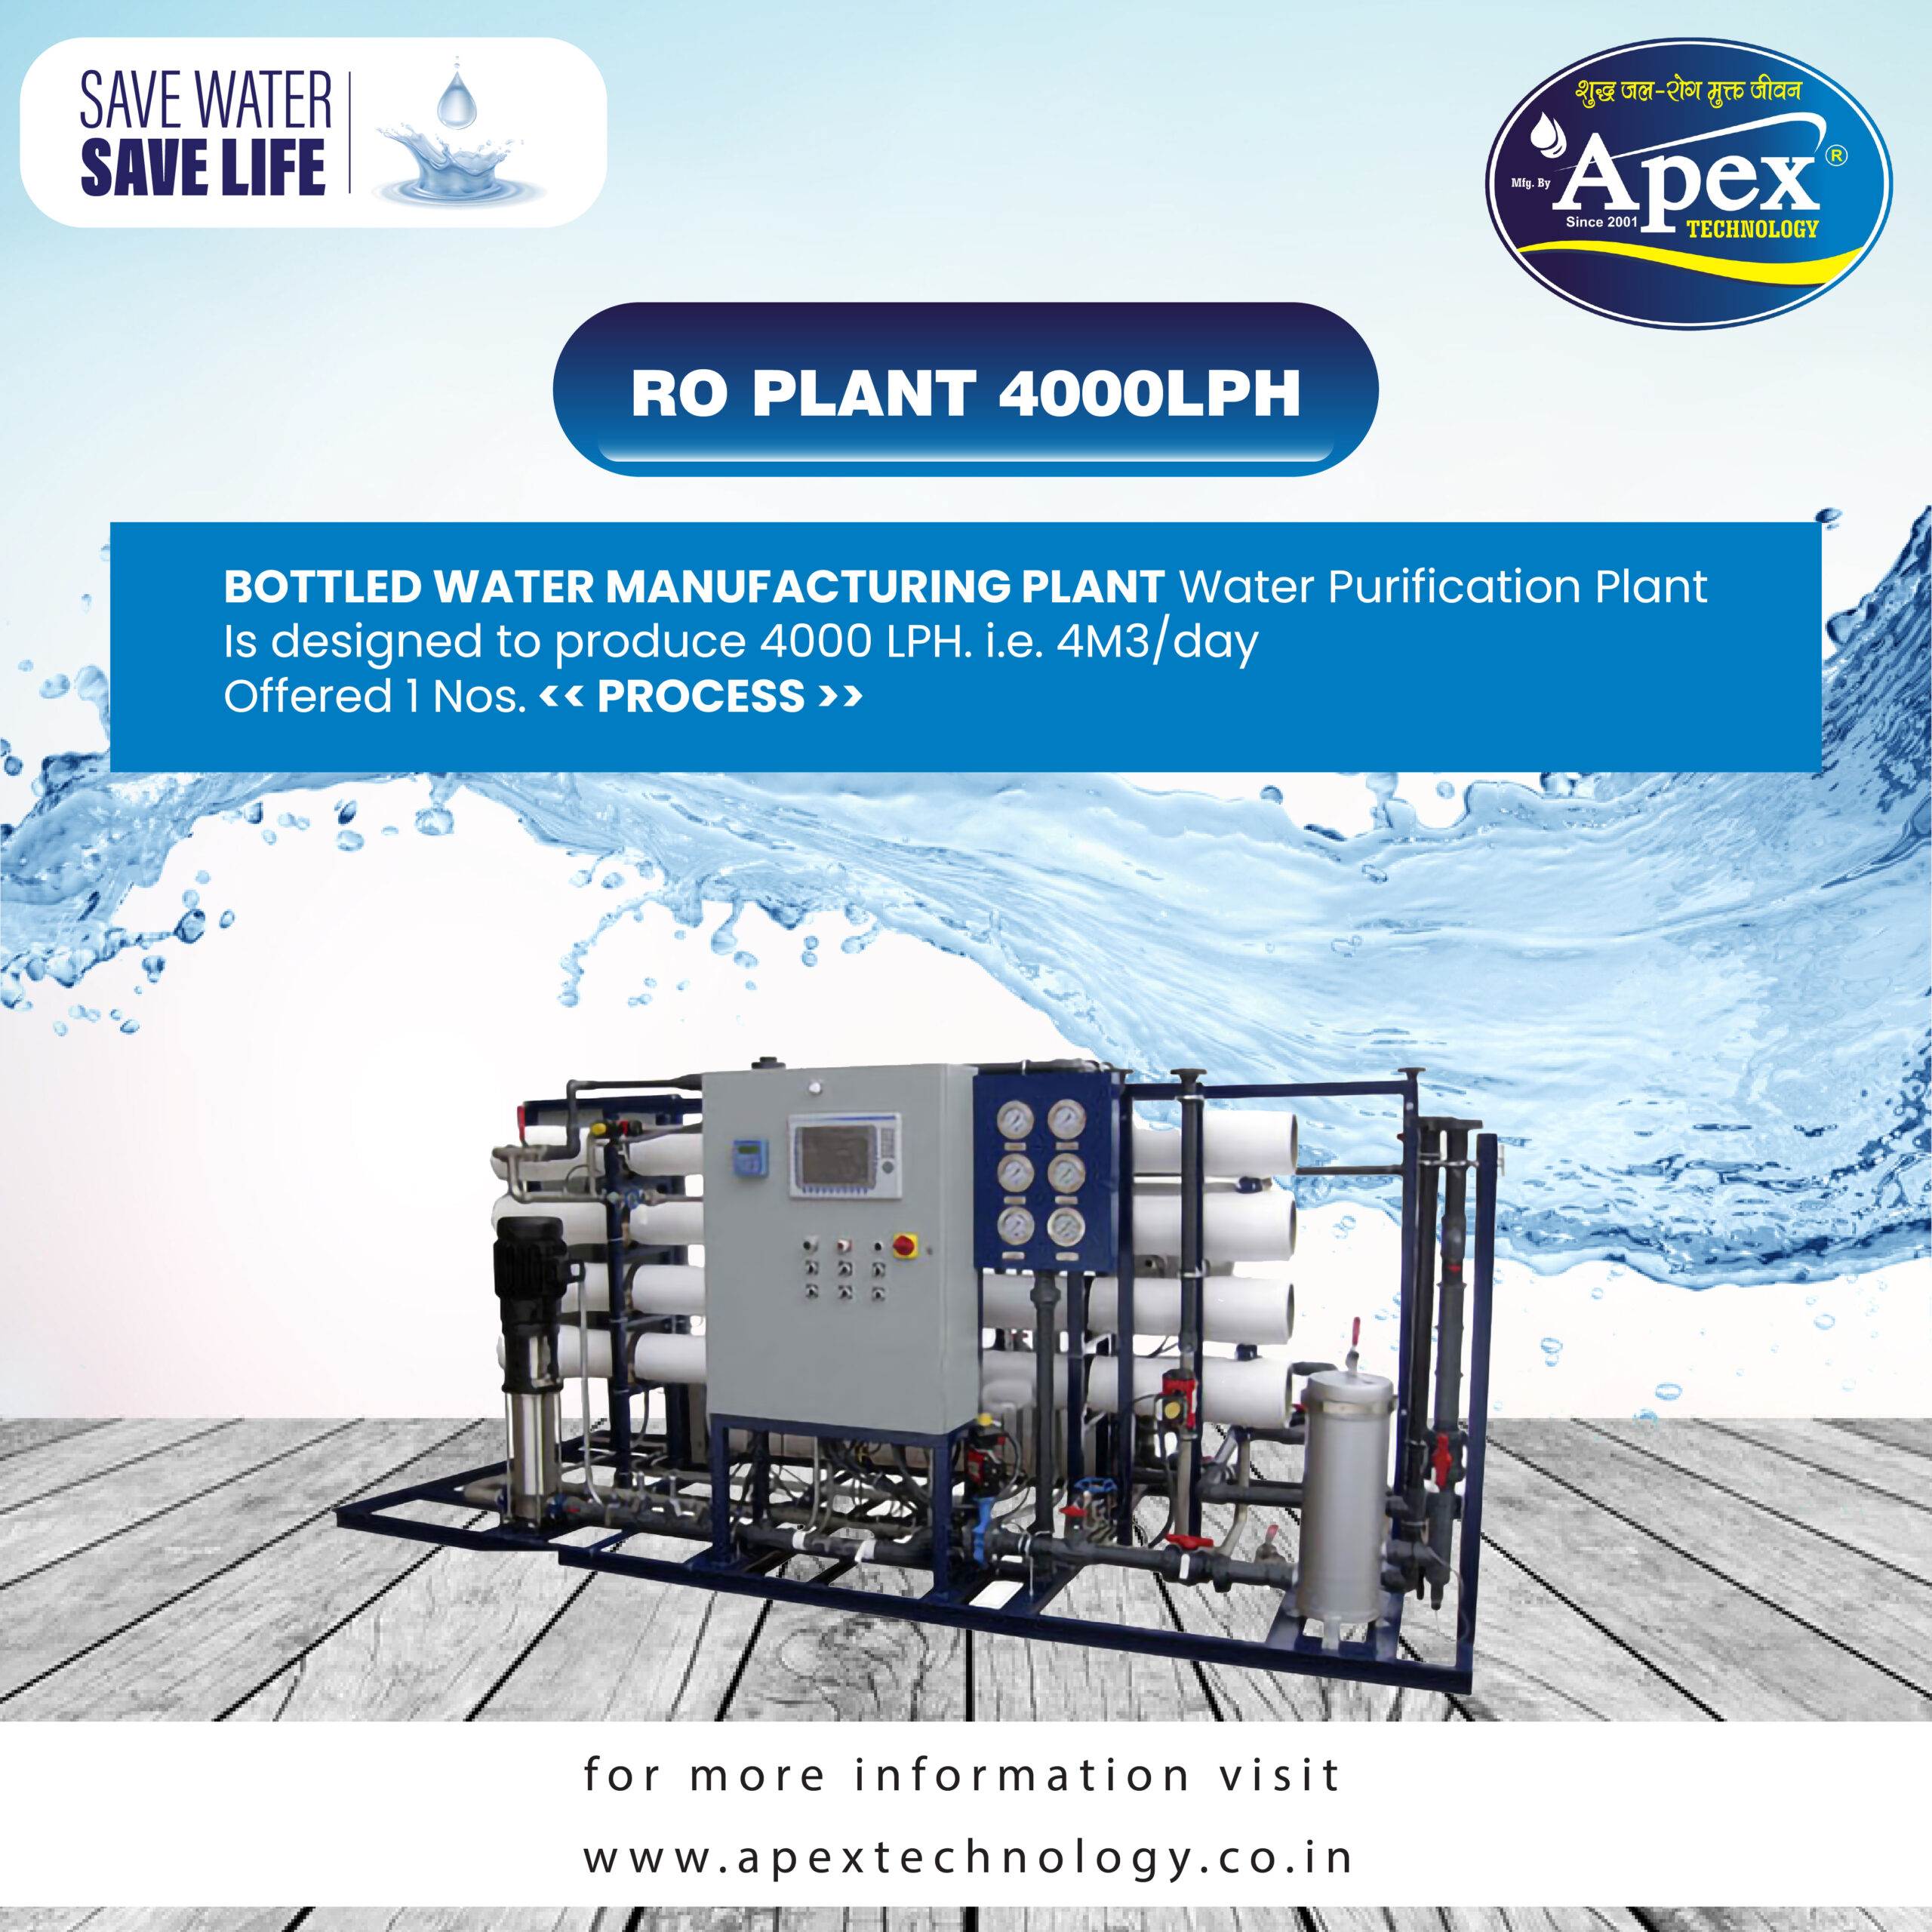 APEX TECHNOLOGY, Packaged Drinking Water Plant in Siliguri, West